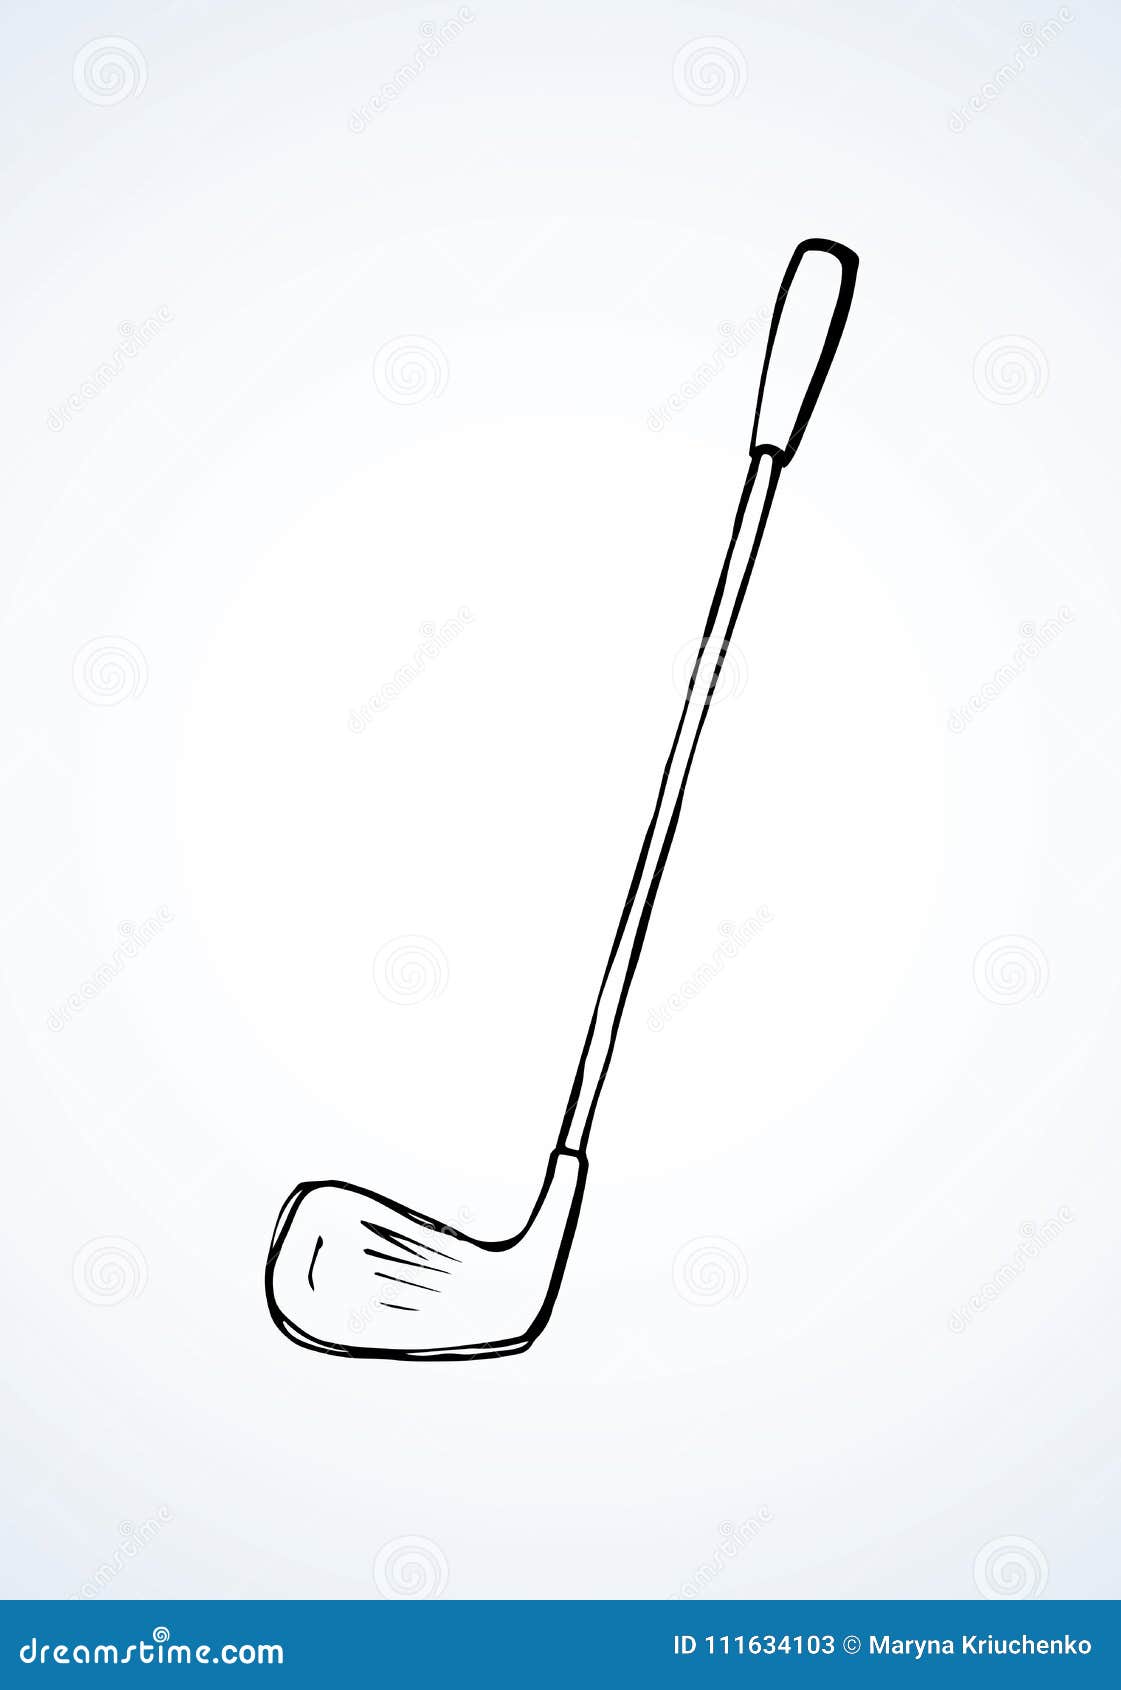 How To Draw A Golf Club And Ball Step By Step